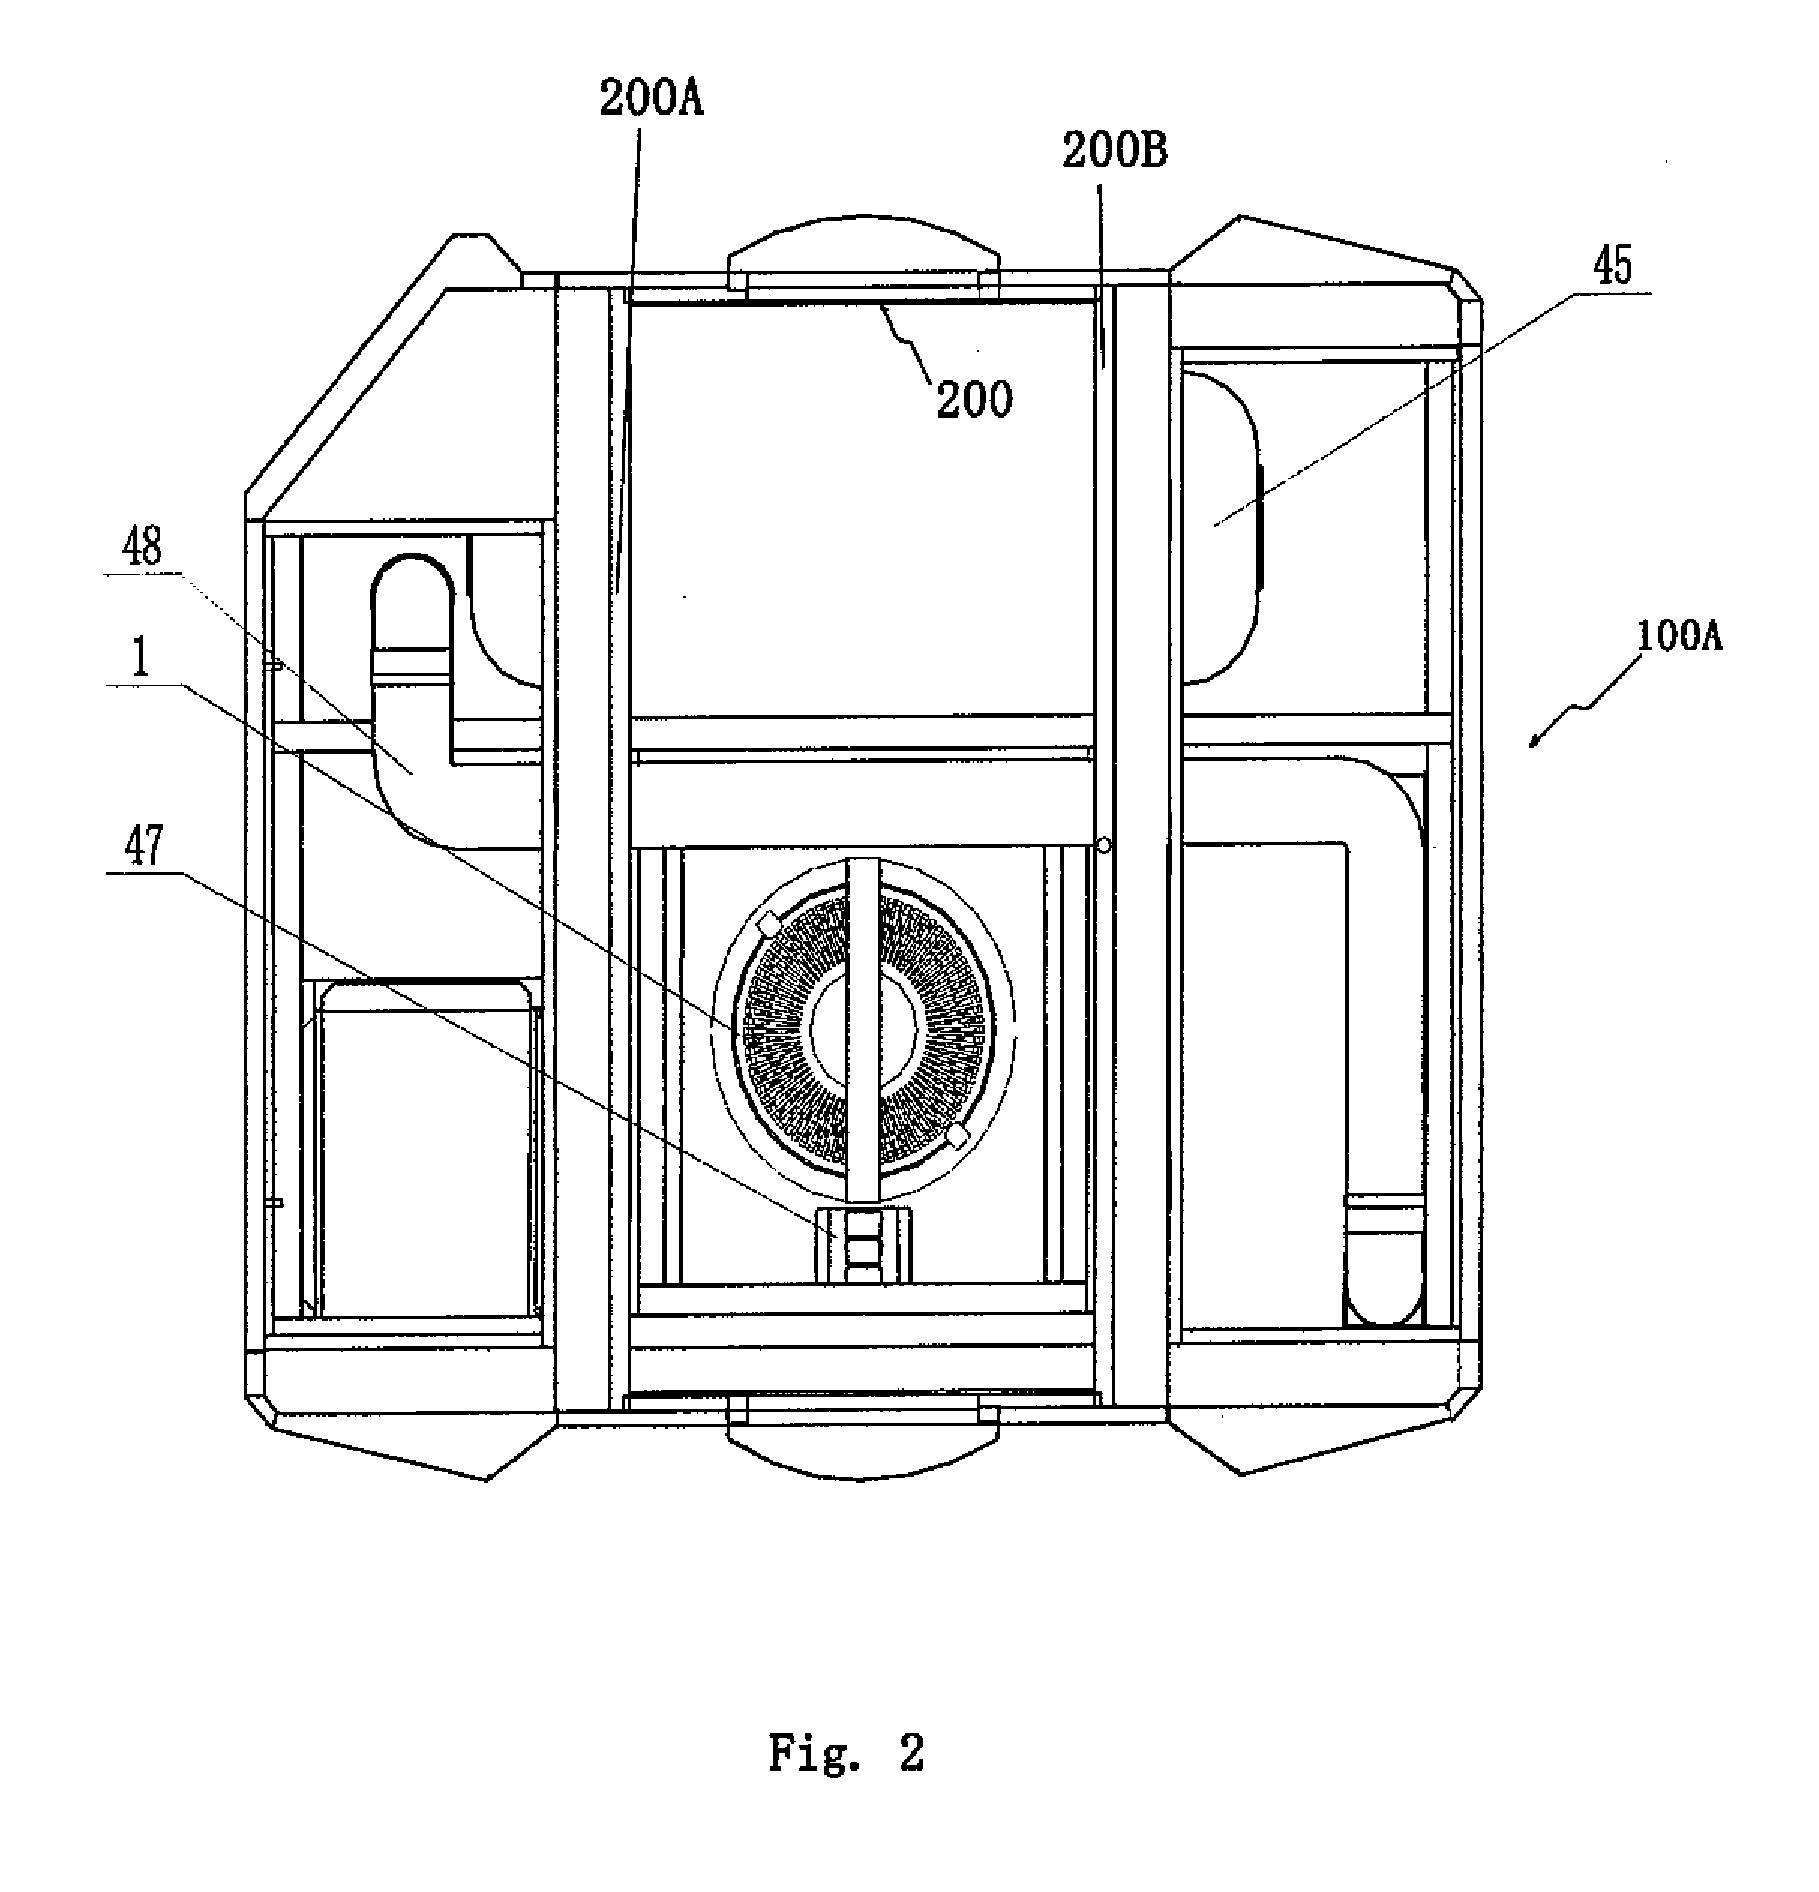 Door-type passenger security inspection apparatus and method for detecting contraband articles such as narcotic drugs, explosives